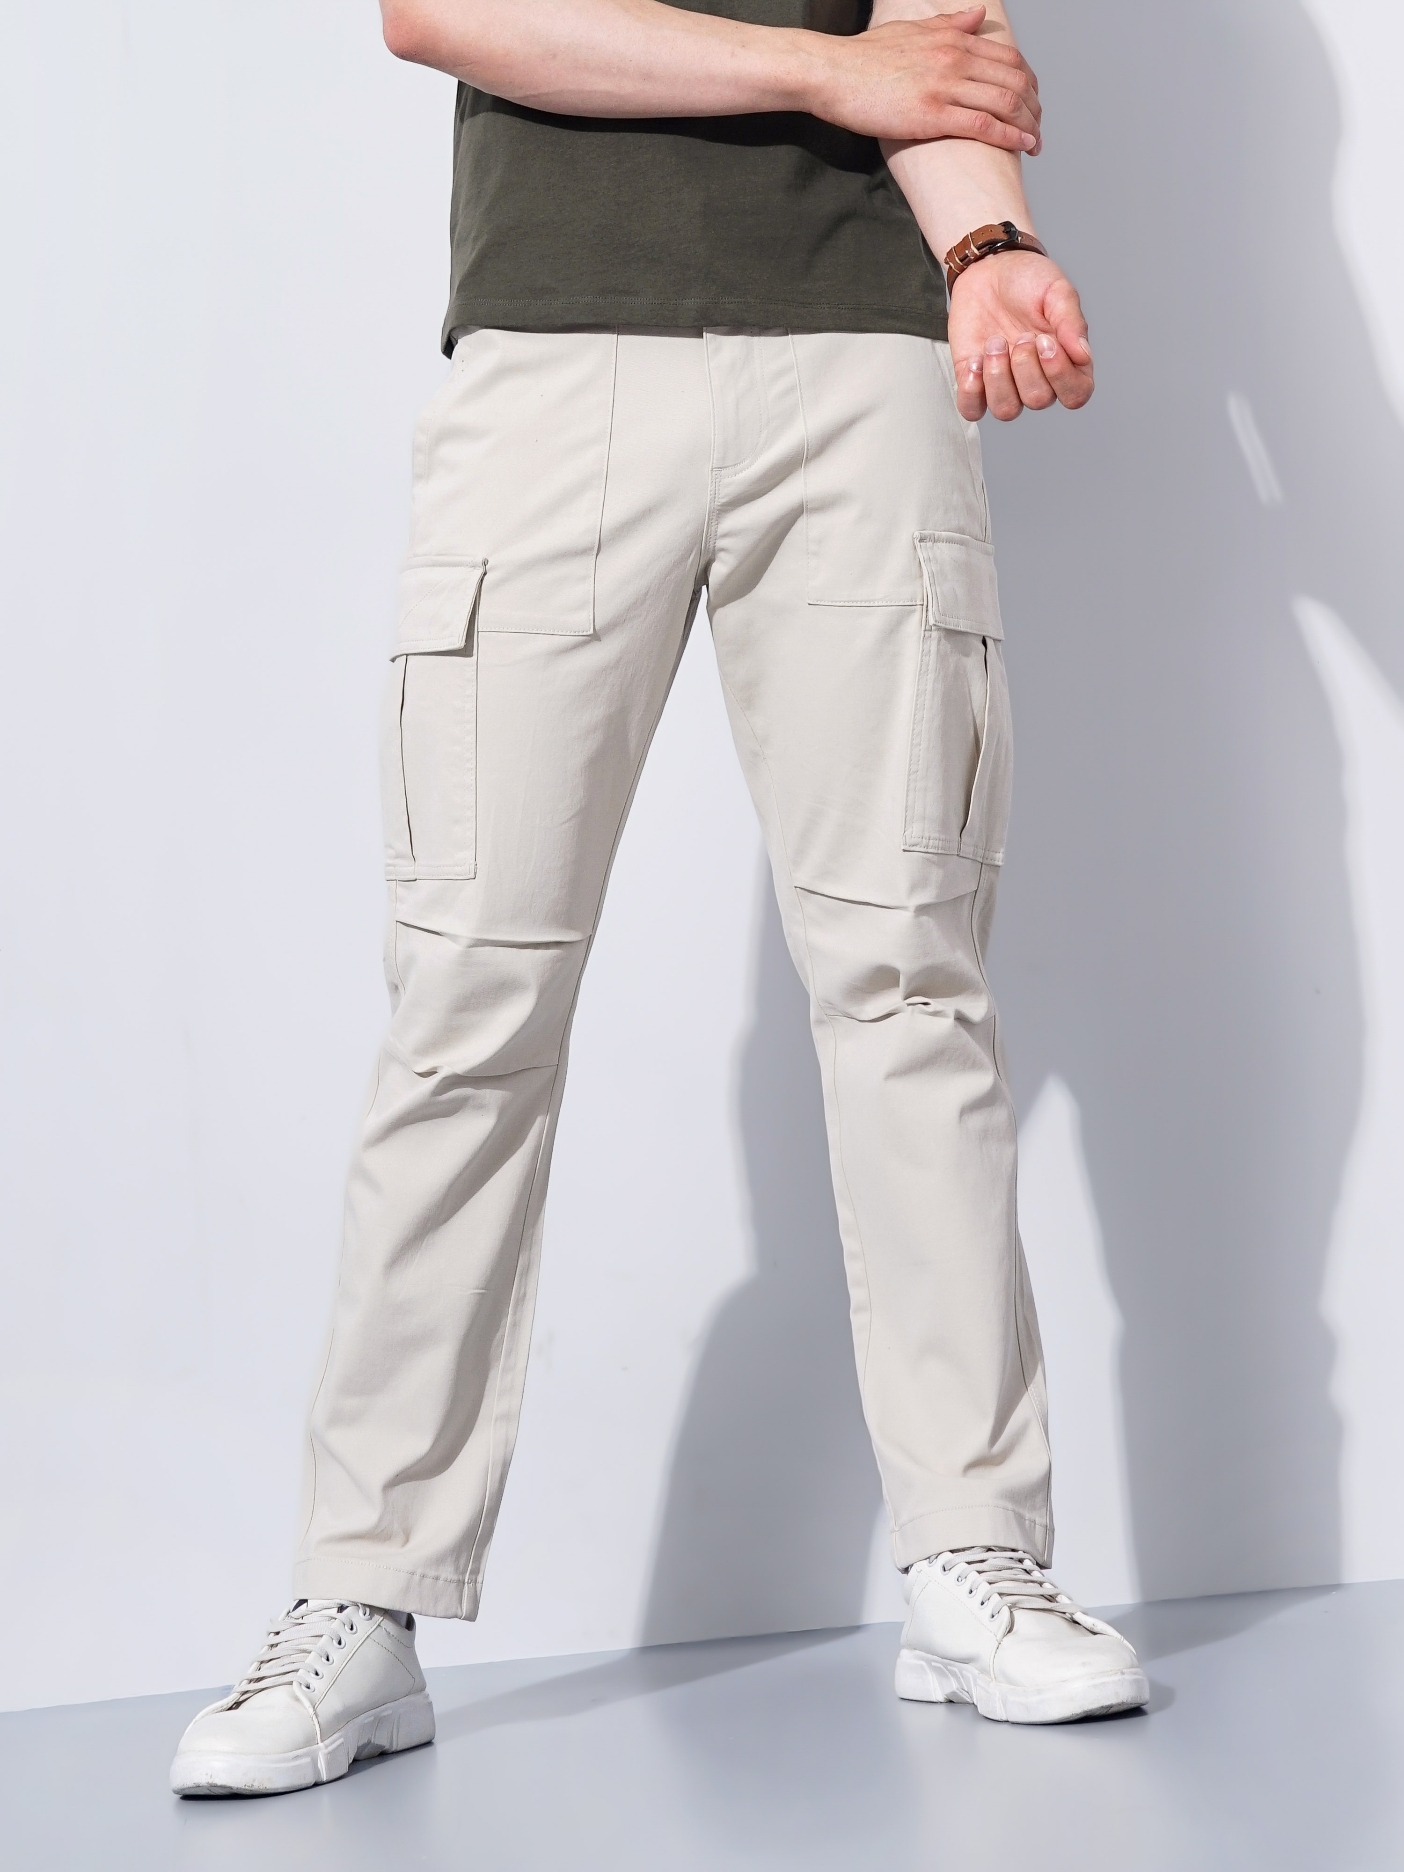 Men's Fashion New Style Pure-Coloured Trousers For Self-Cultivation Trouser  Pant - Walmart.com